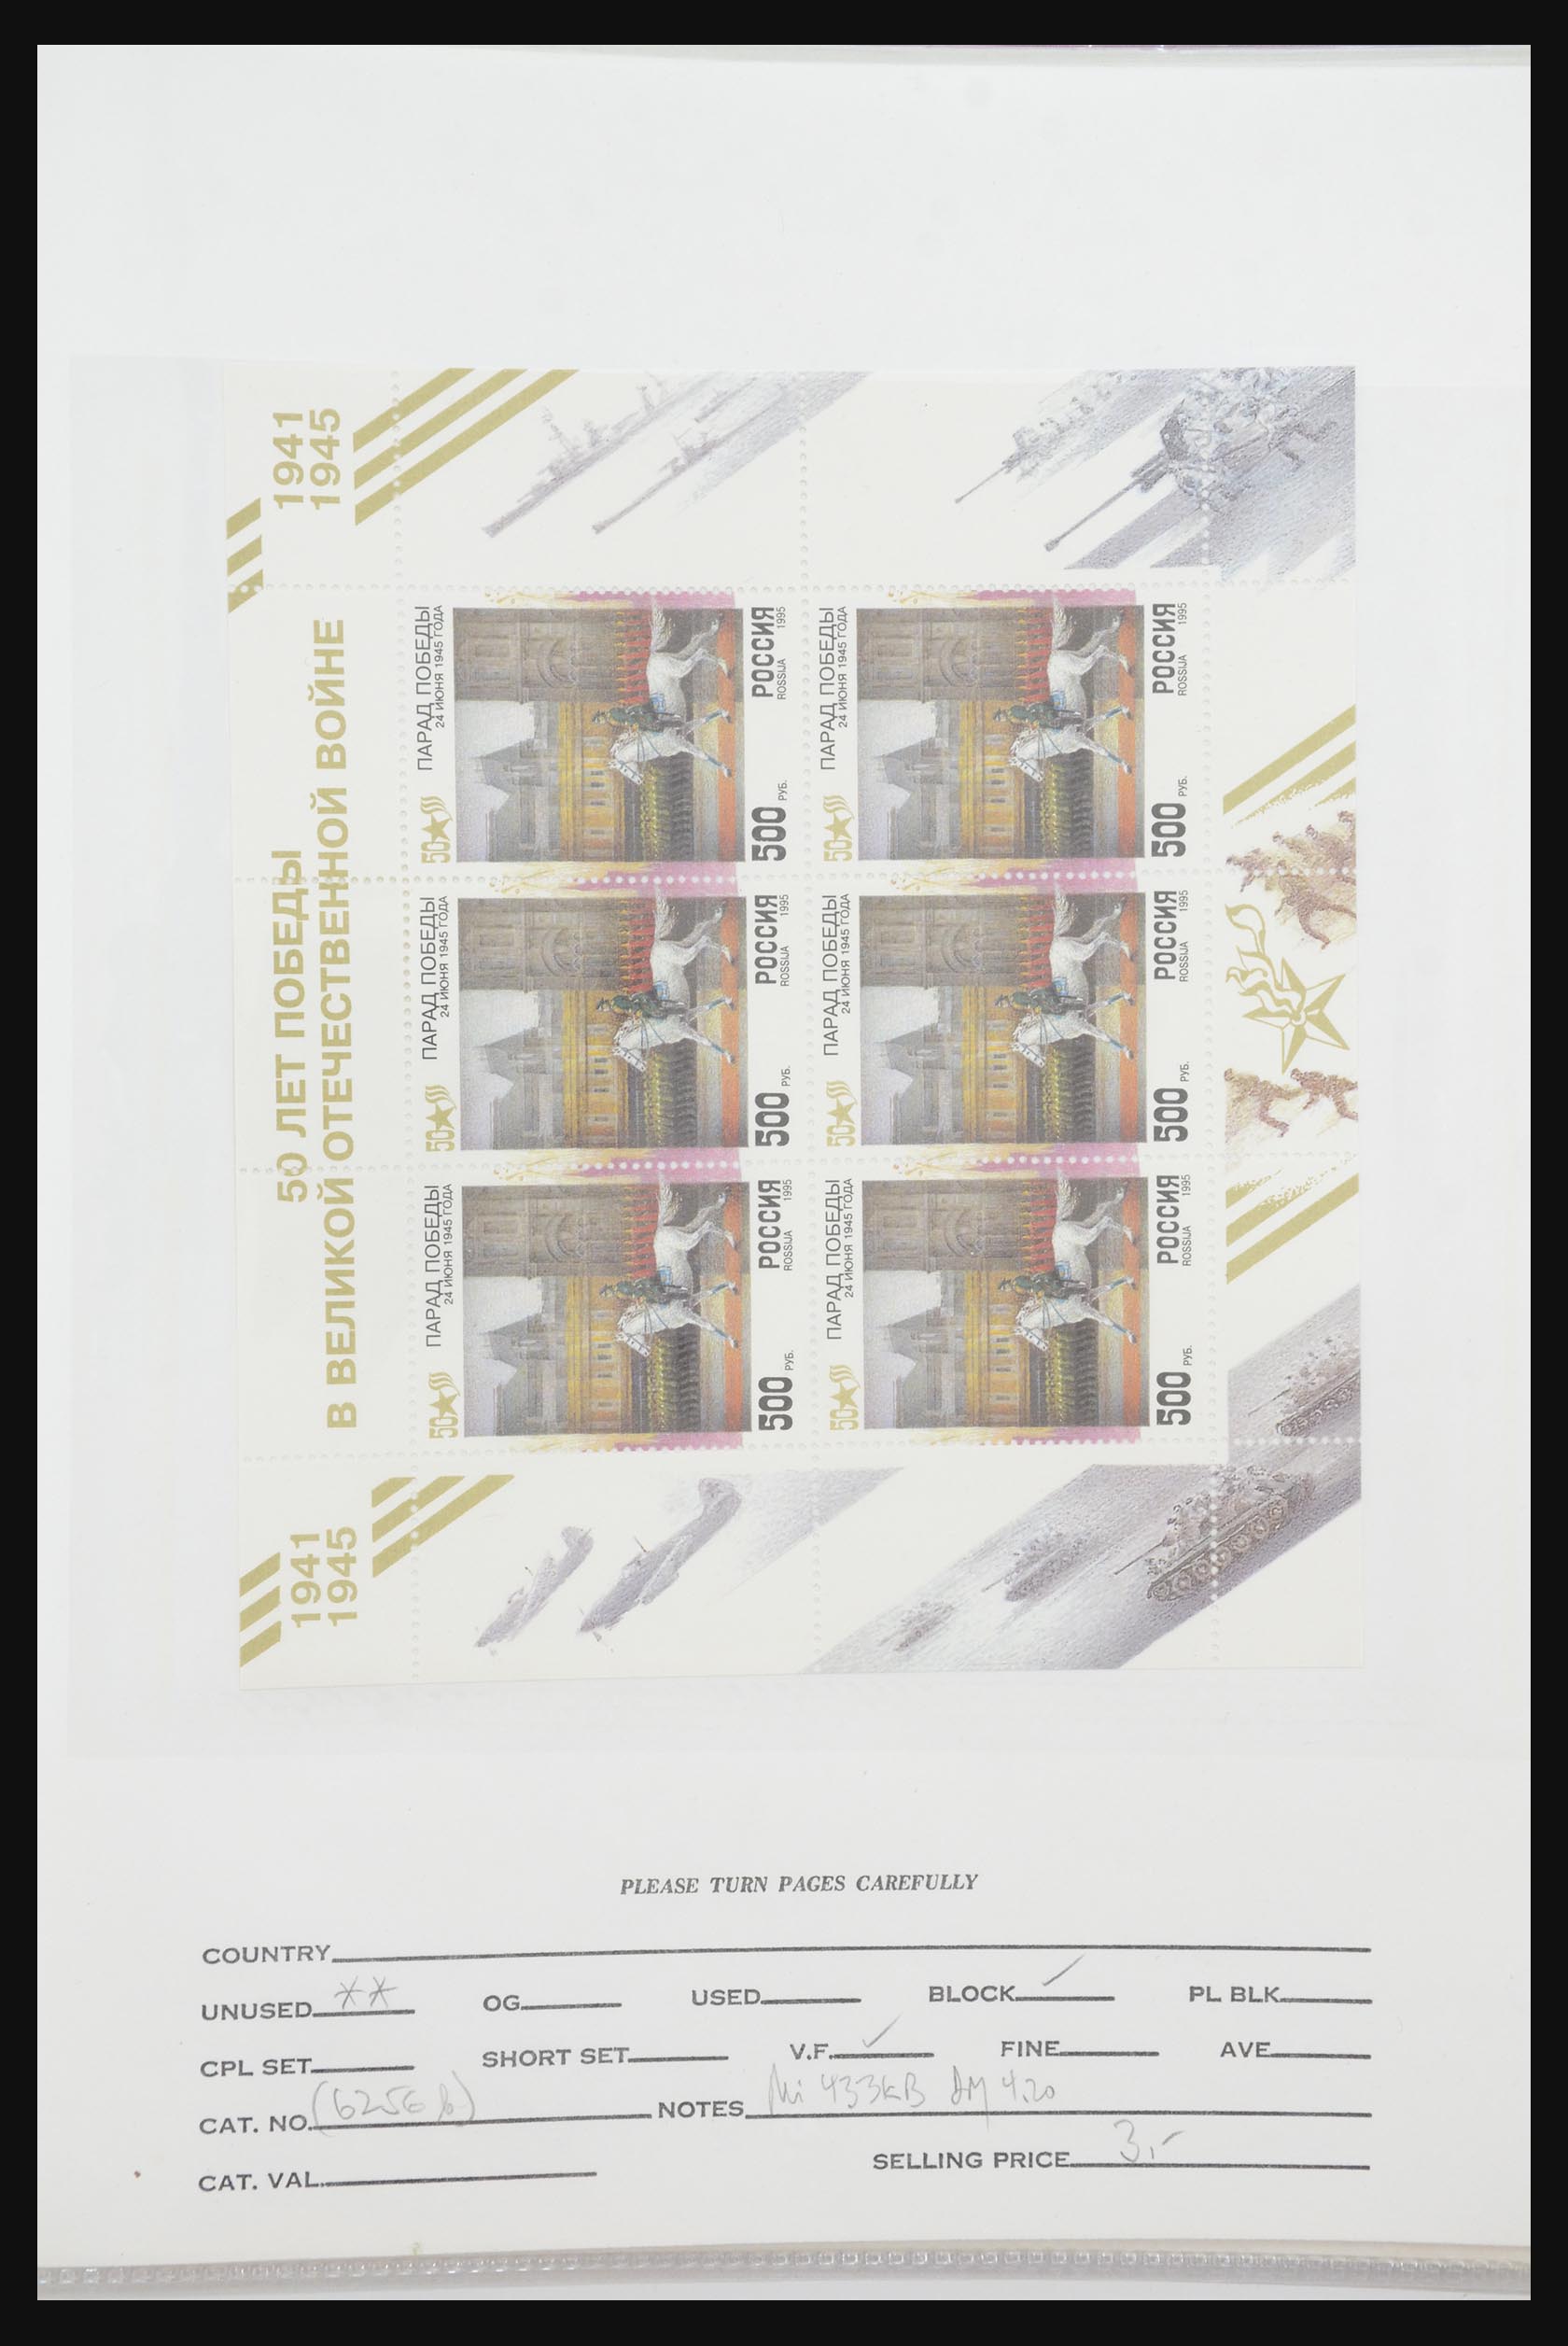 31915 137 - 31915 Western Europe souvenir sheets and stamp booklets on FDC.